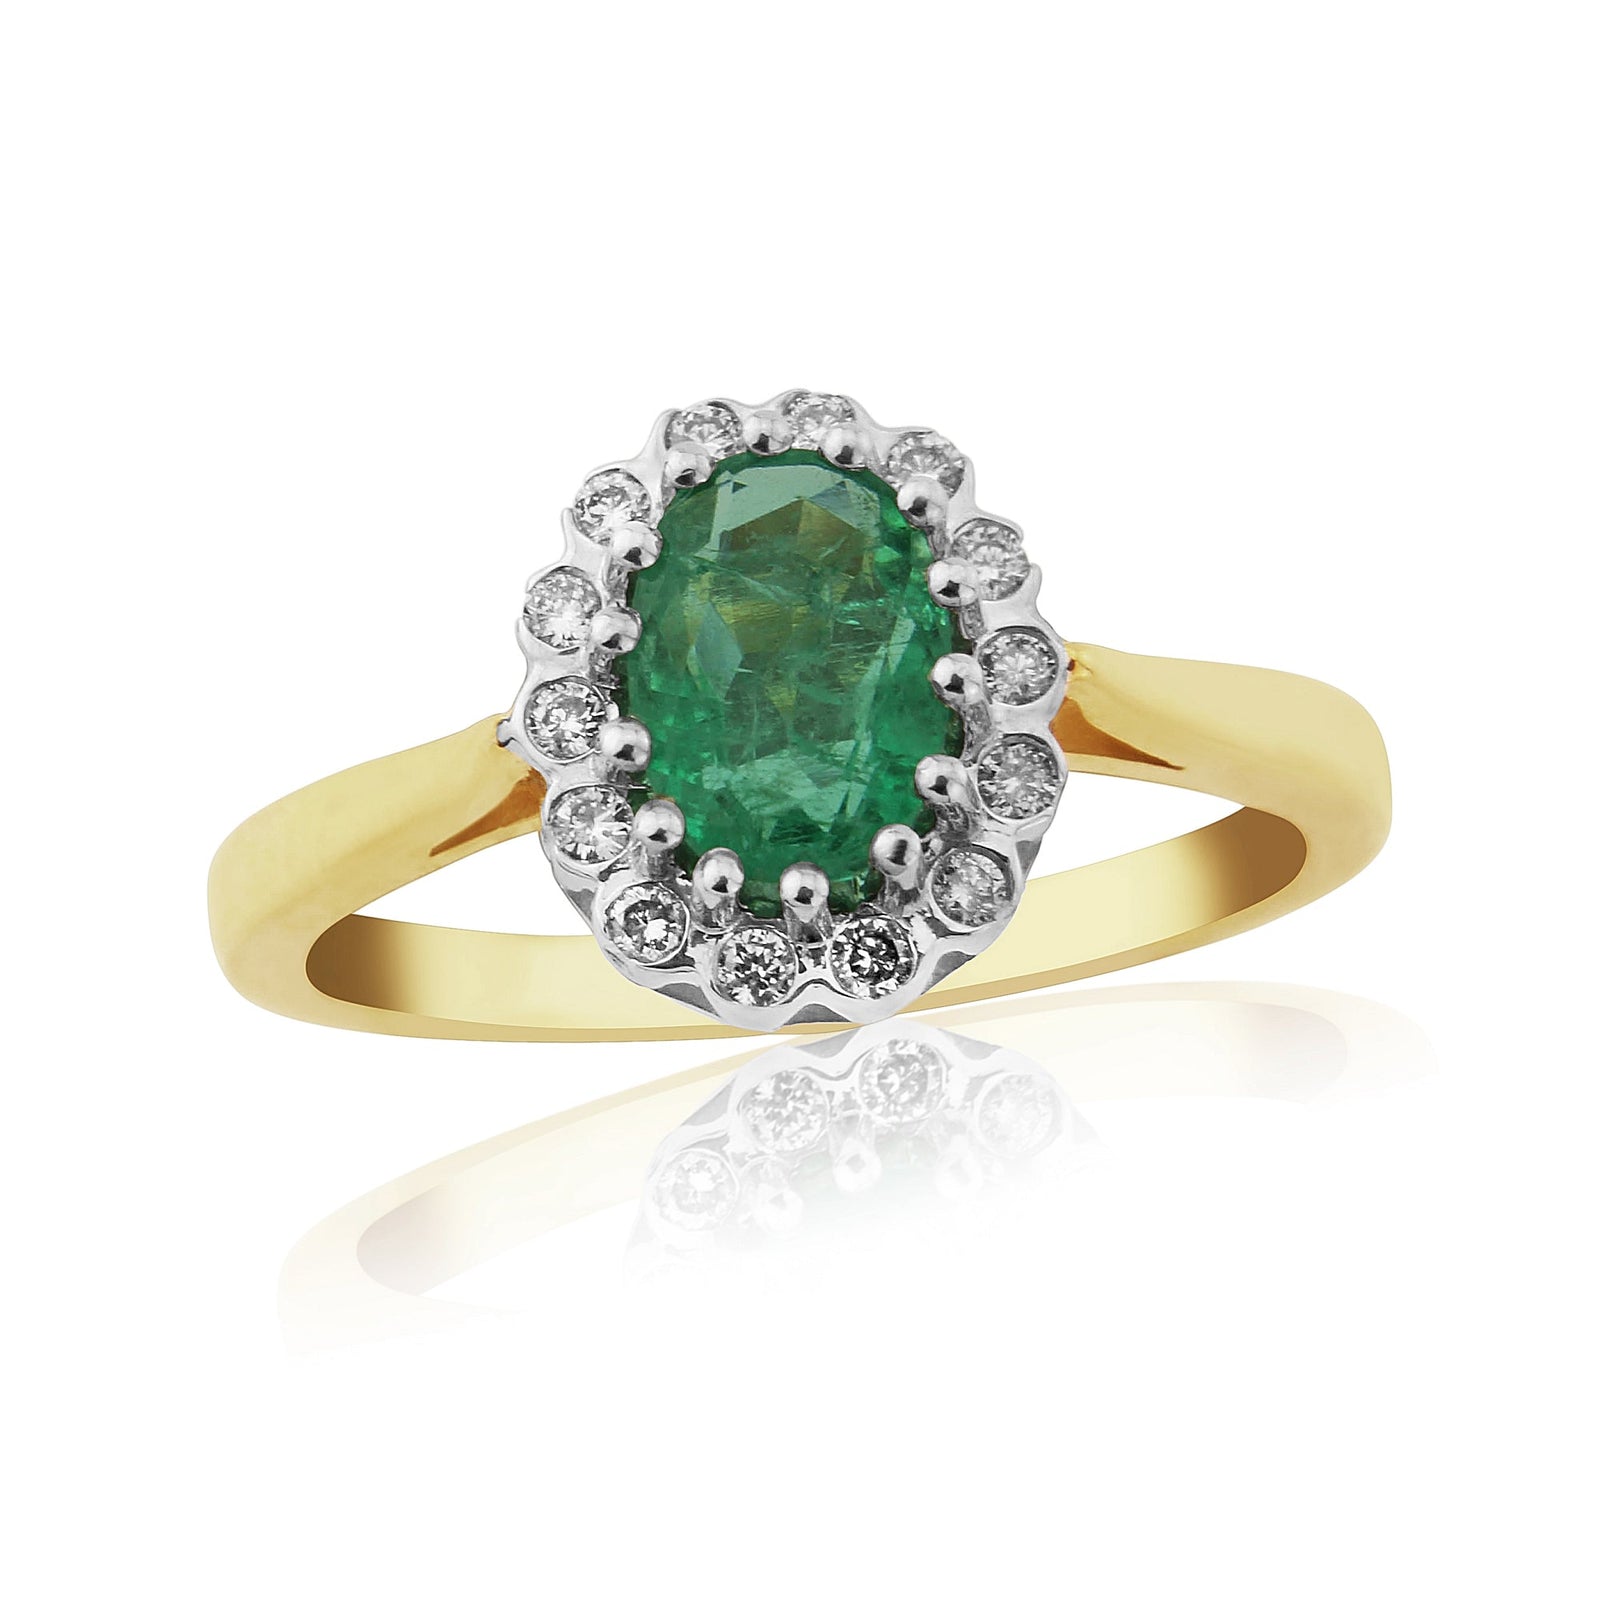 9ct gold 7x5mm oval emerald & diamond cluster ring 0.12ct